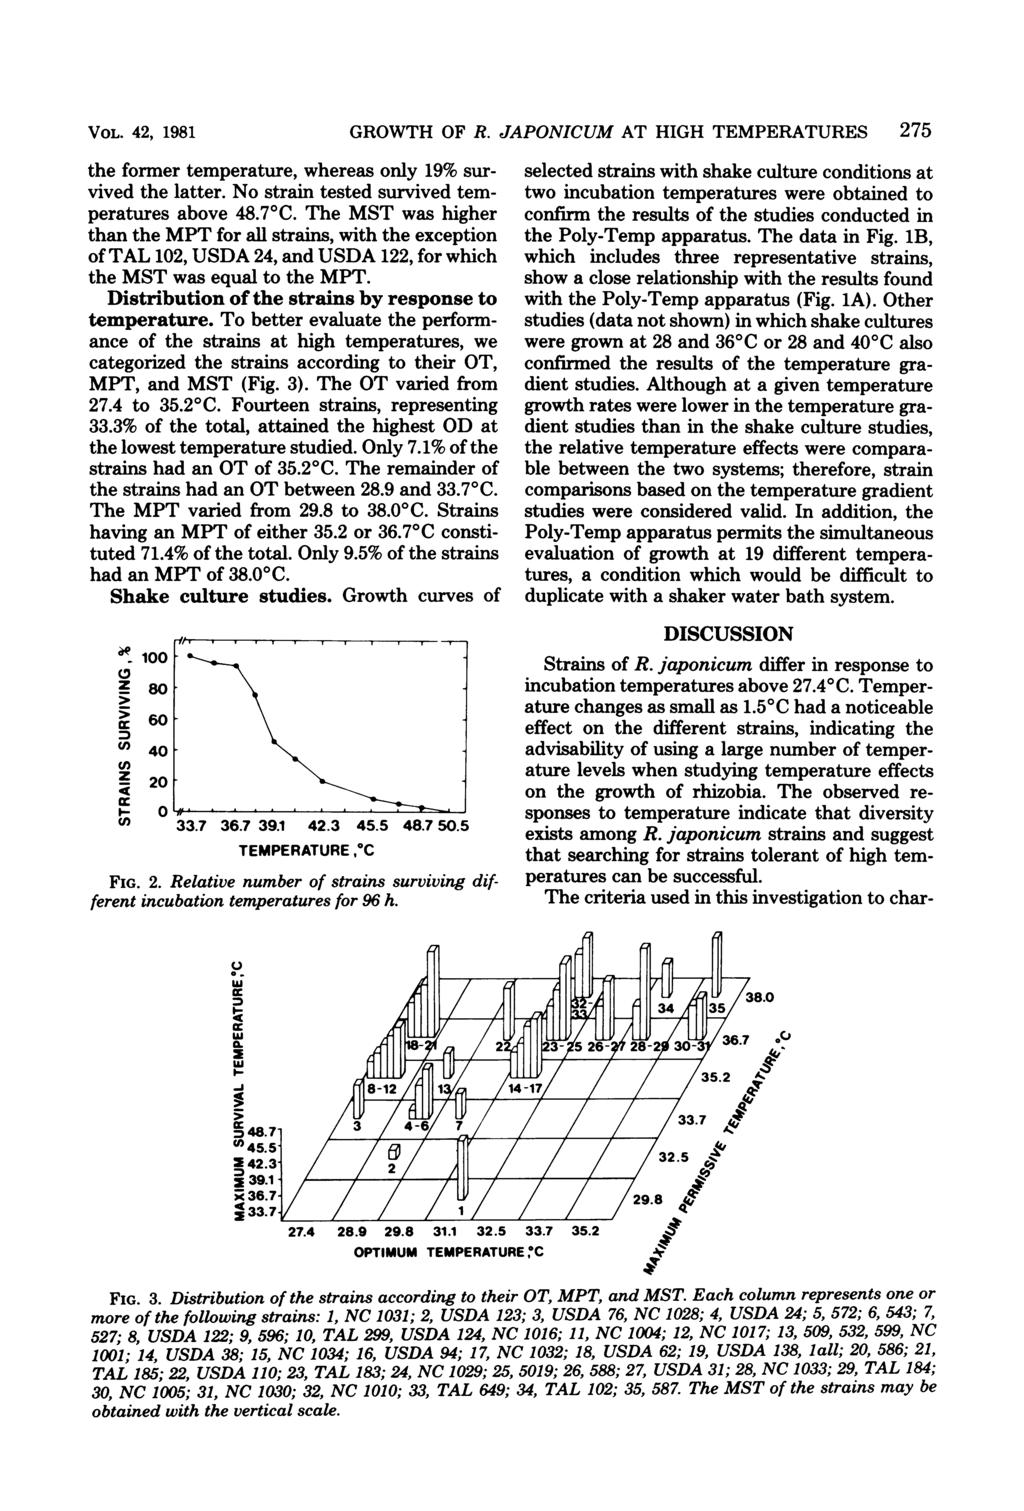 VOL. 42, 1981 the former temperature, whereas only 19% survived the latter. No strain tested survived temperatures above 48.7 C.